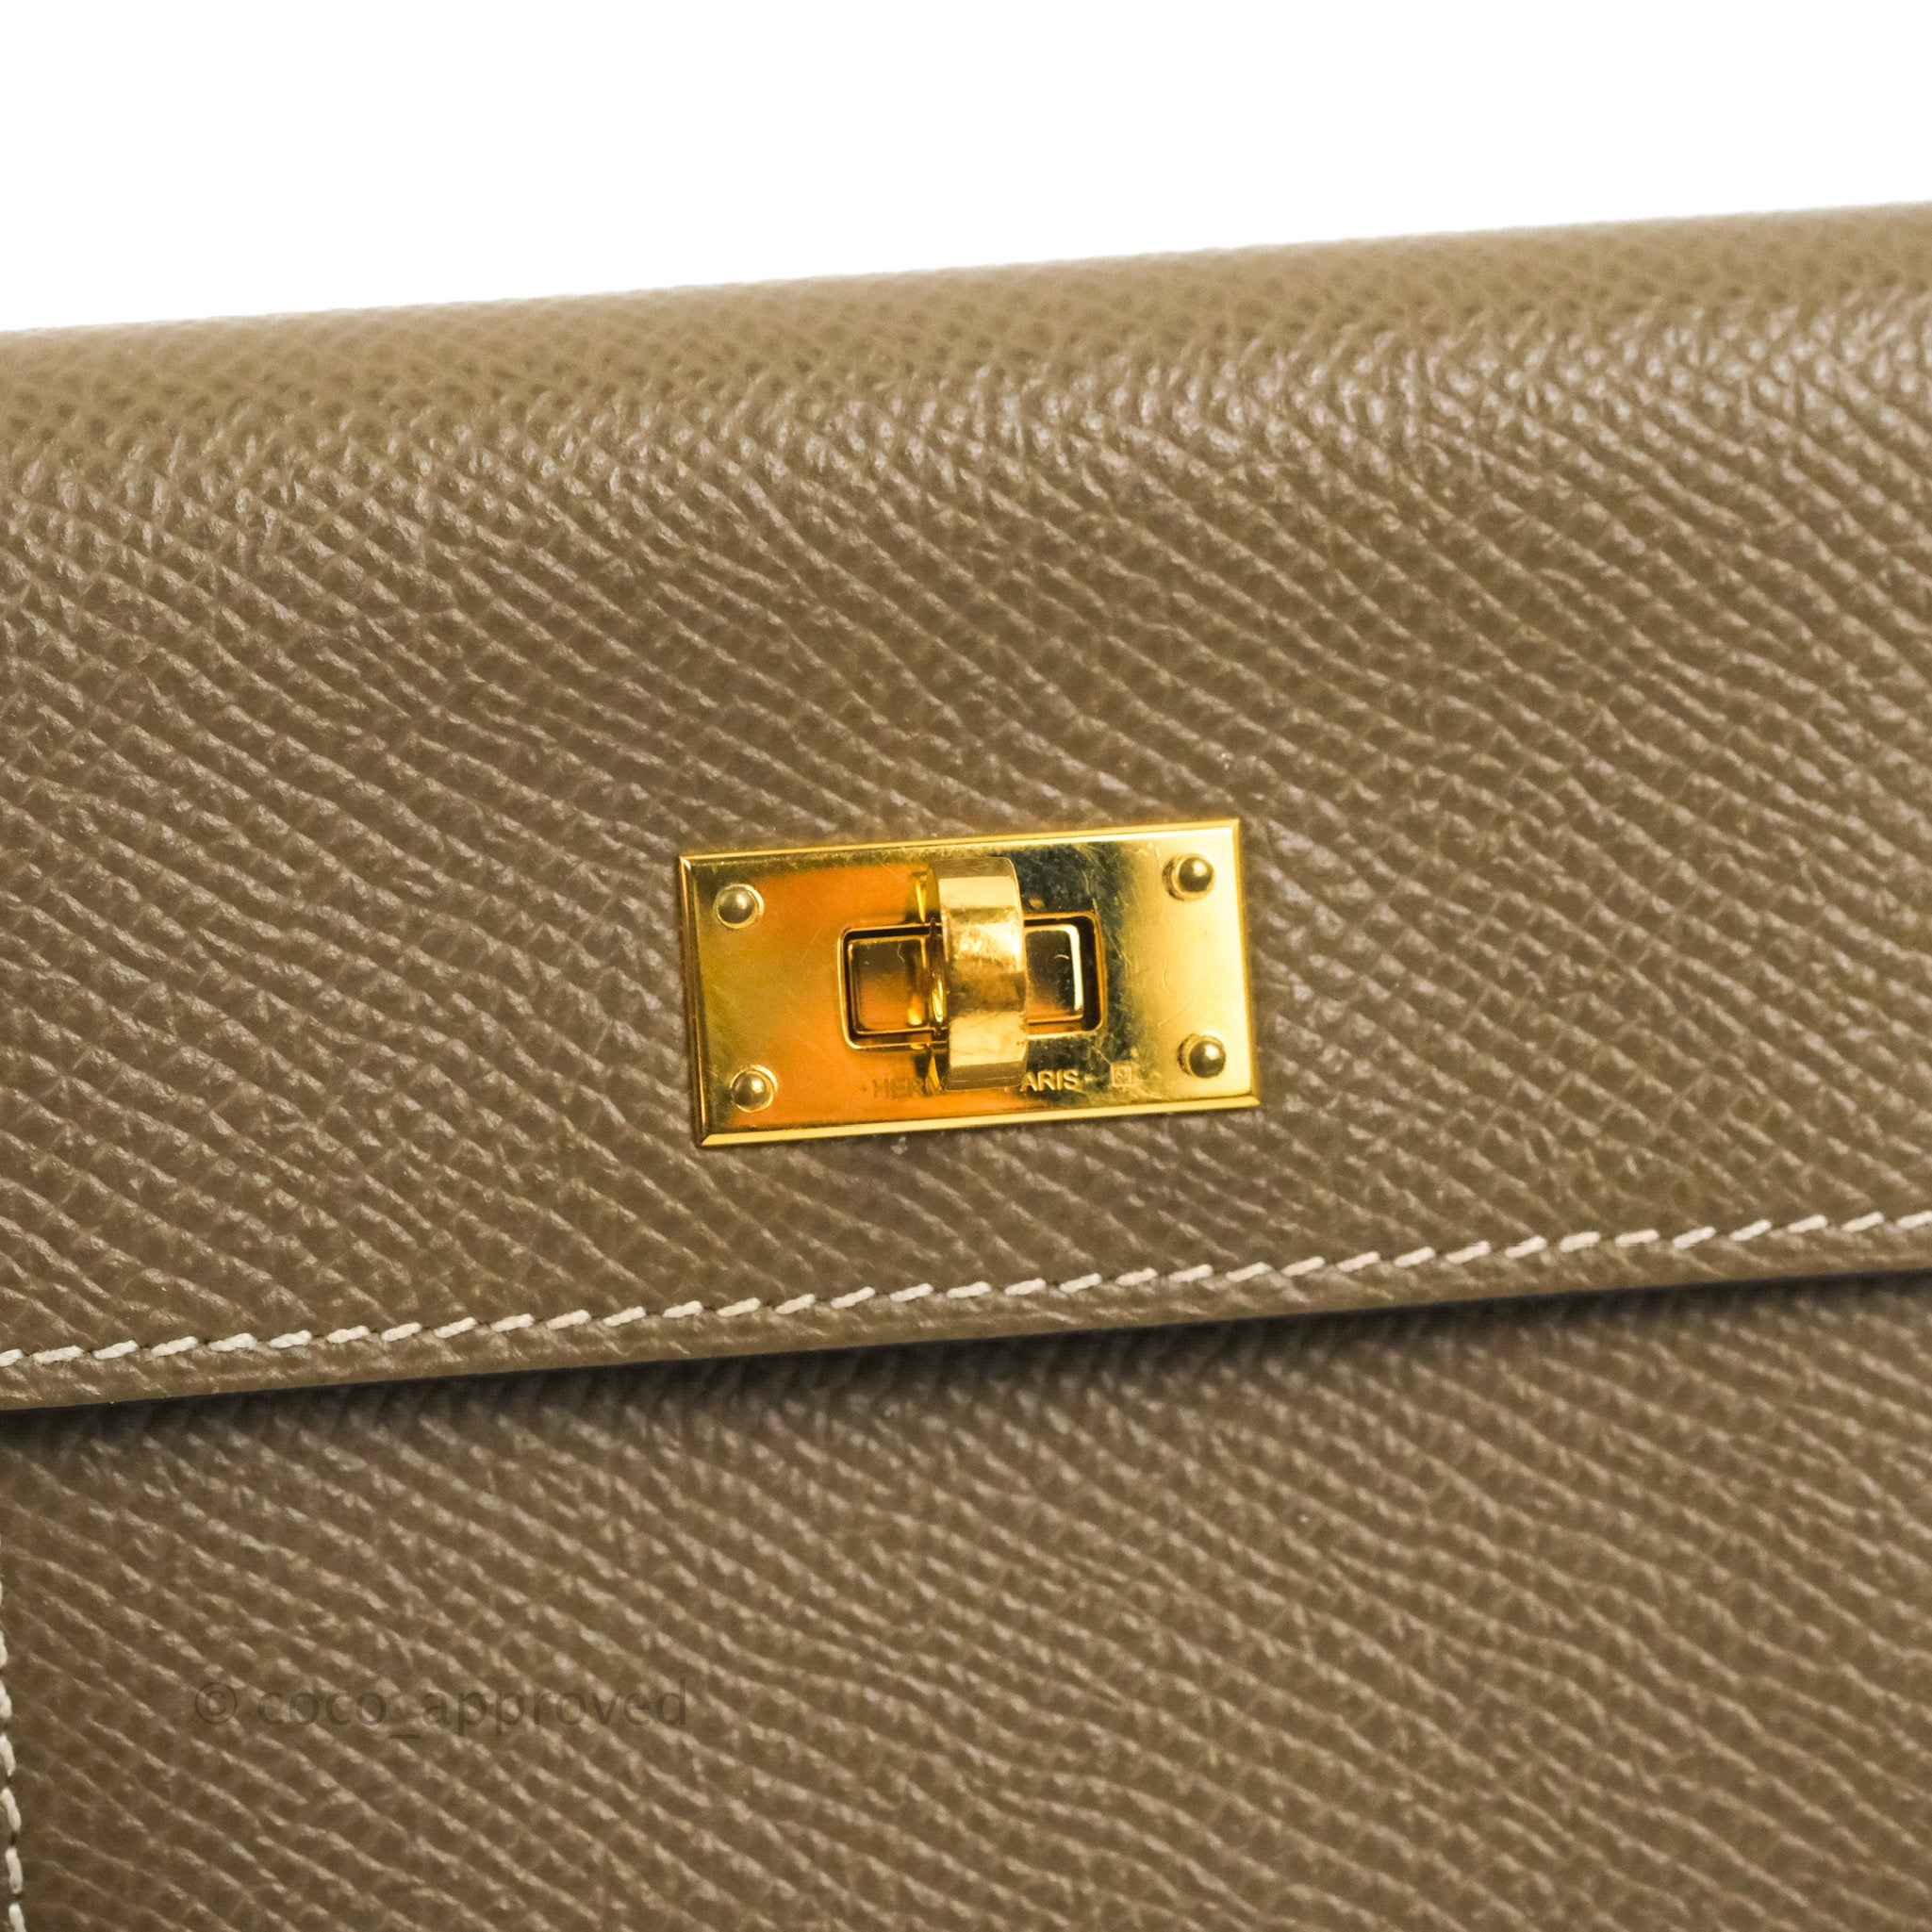 Hermès Kelly Pocket Compact Wallet Epsom Etoupe Gold Hardware – Coco  Approved Studio